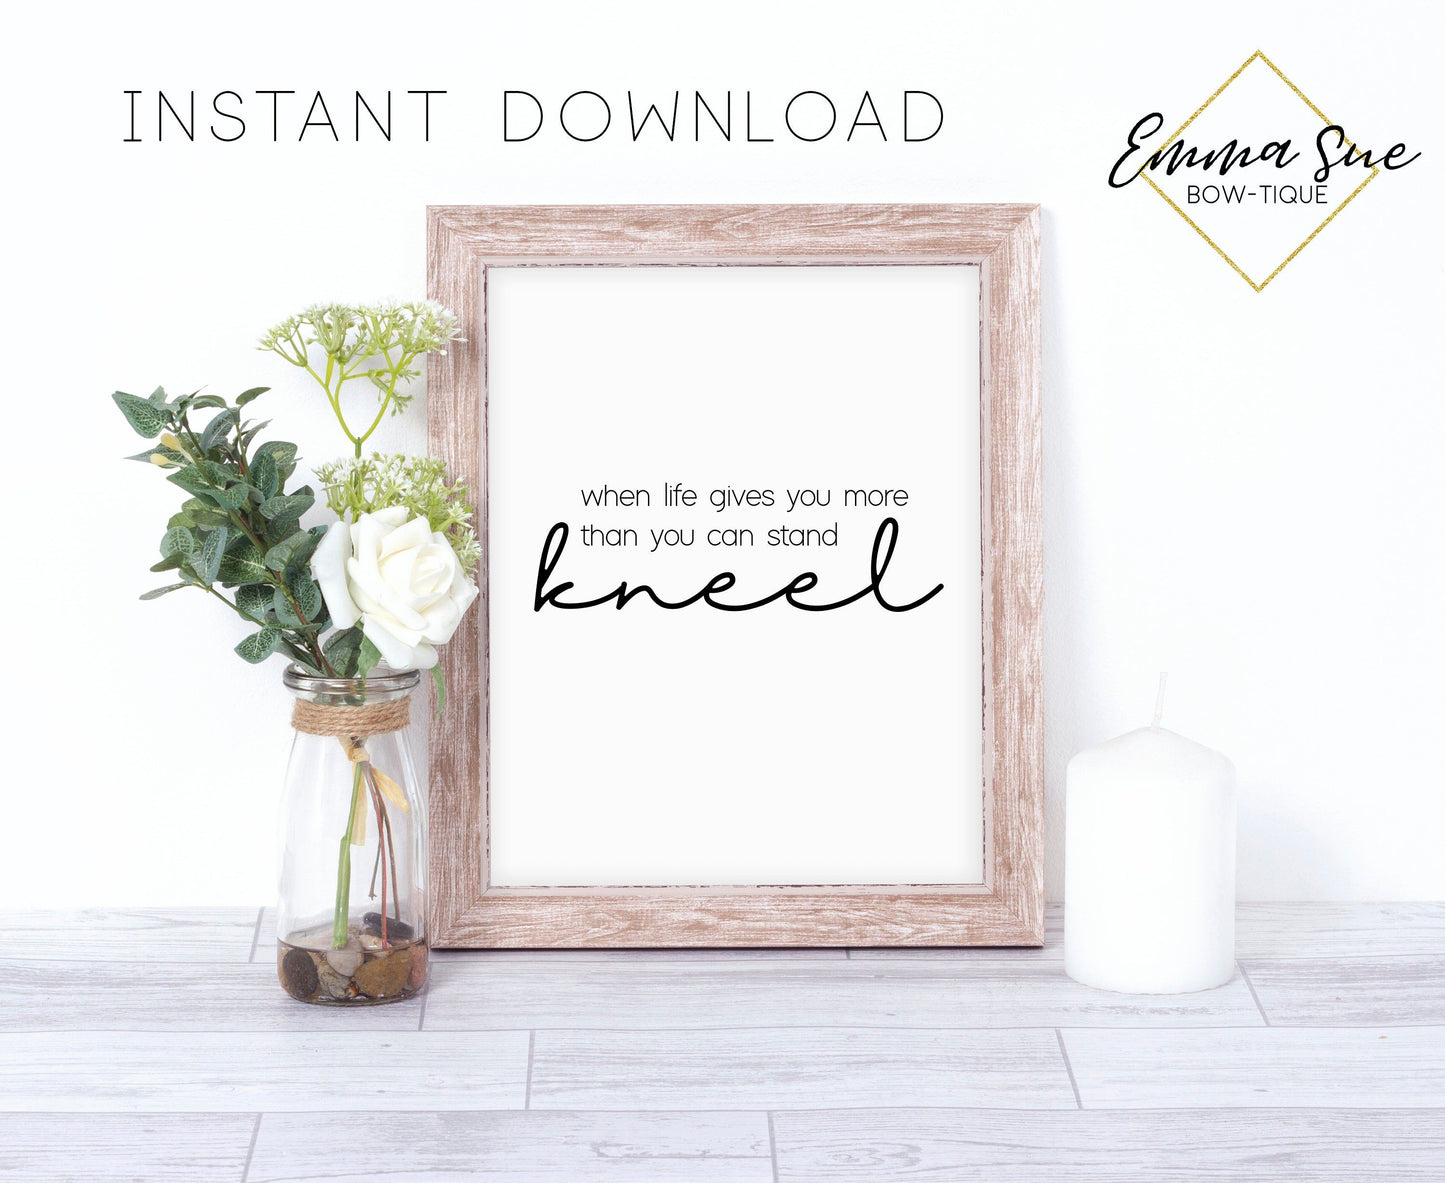 When life gives you more than you stand Kneel - Prayer Christian Farmhouse Printable Art Sign Digital File